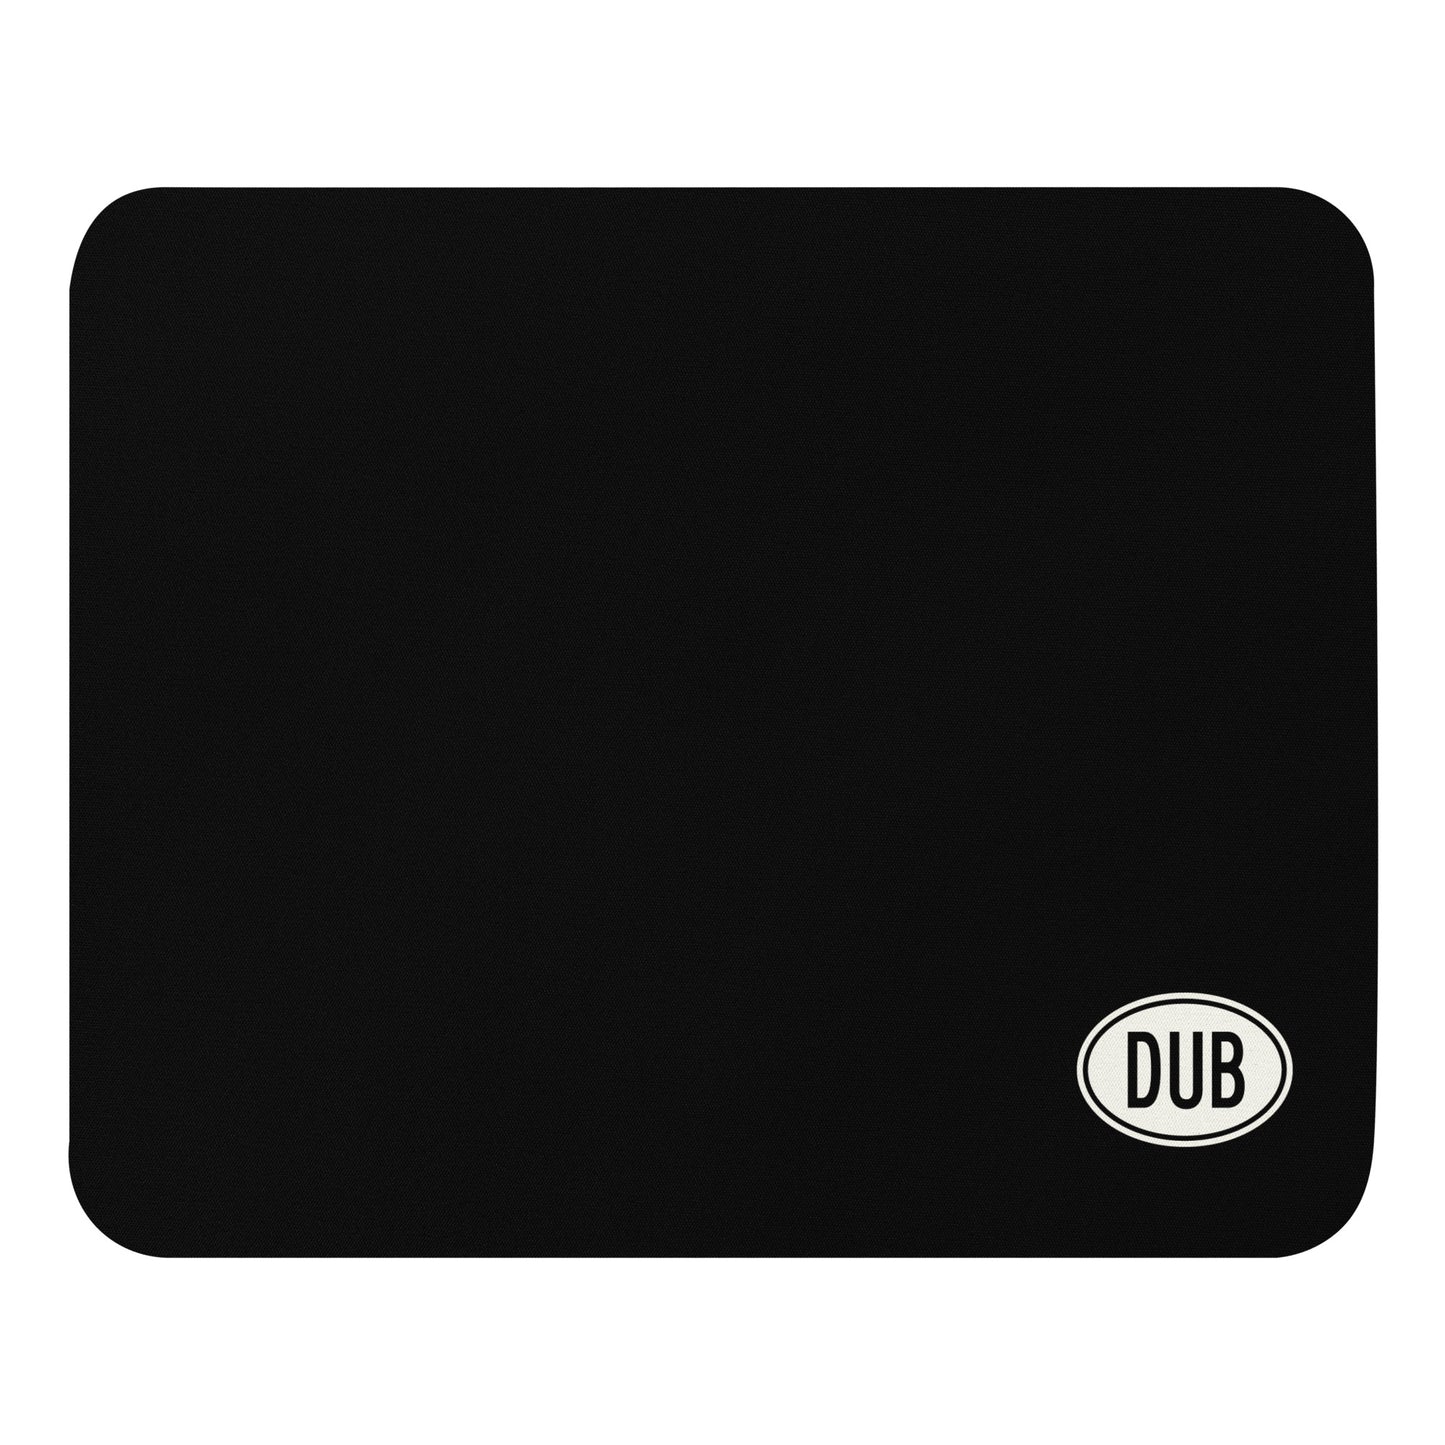 Unique Travel Gift Mouse Pad - White Oval • DUB Dublin • YHM Designs - Image 01